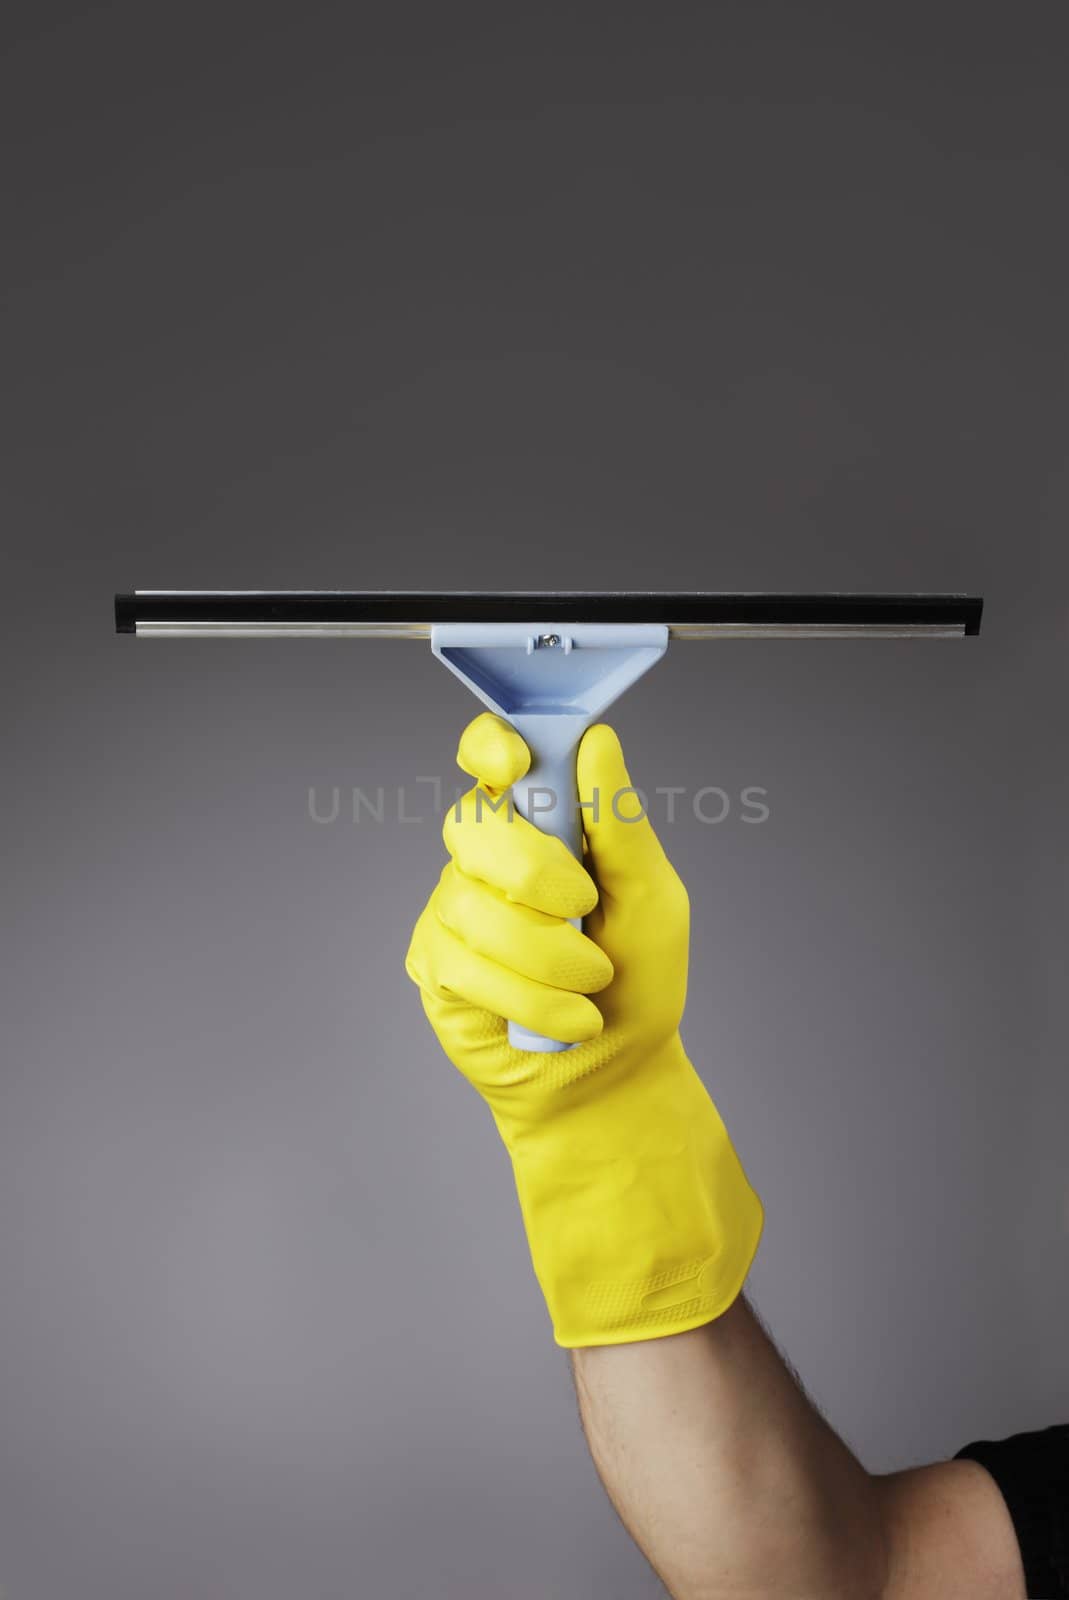 A gloved hand holding a squeegee